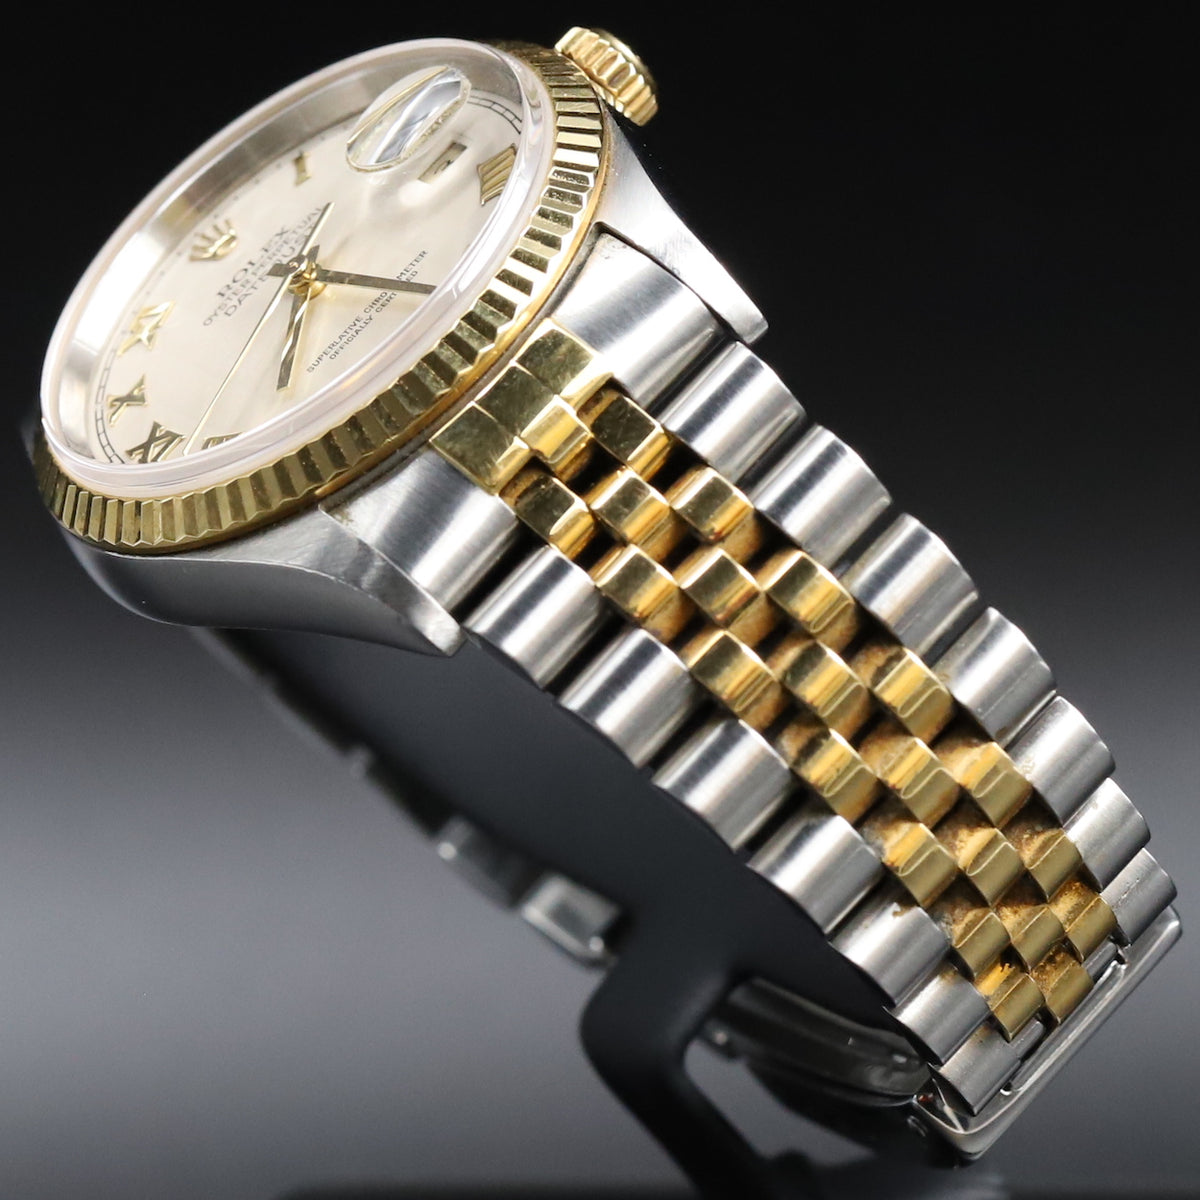 Rolex<br>16013 Datejust 36 SS/18k White Dial